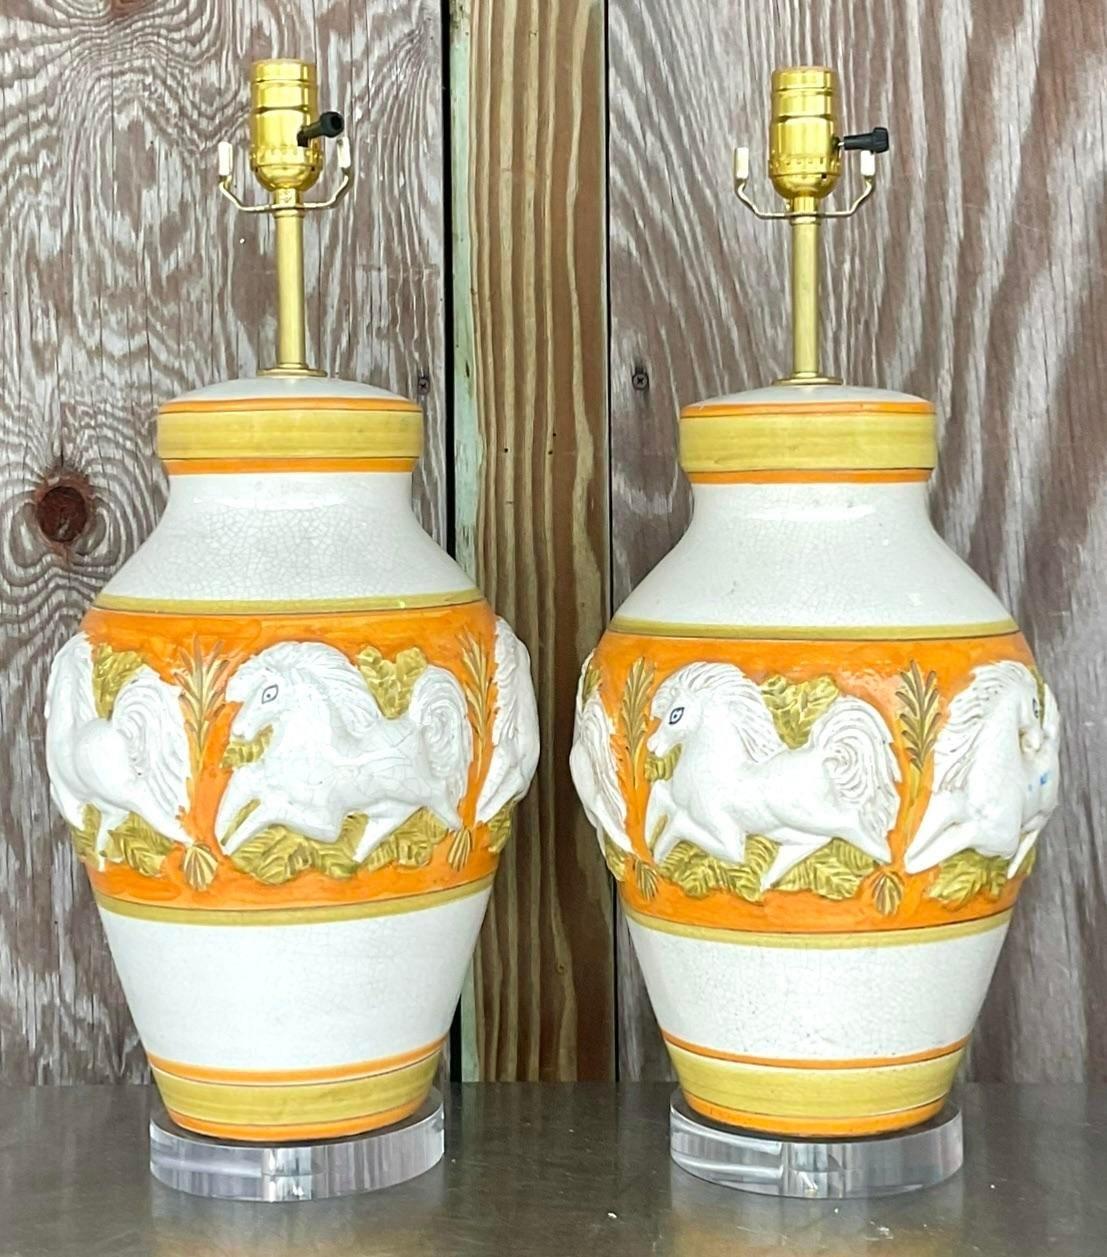 A fantastic pair of vintage MCM table lamps. A chic period relief prancing horse in a fabulous hand painted design. Brilliant colors. Fully restored with all new wiring, hardware and lucite plinth. Acquired from a Palm Beach estate.